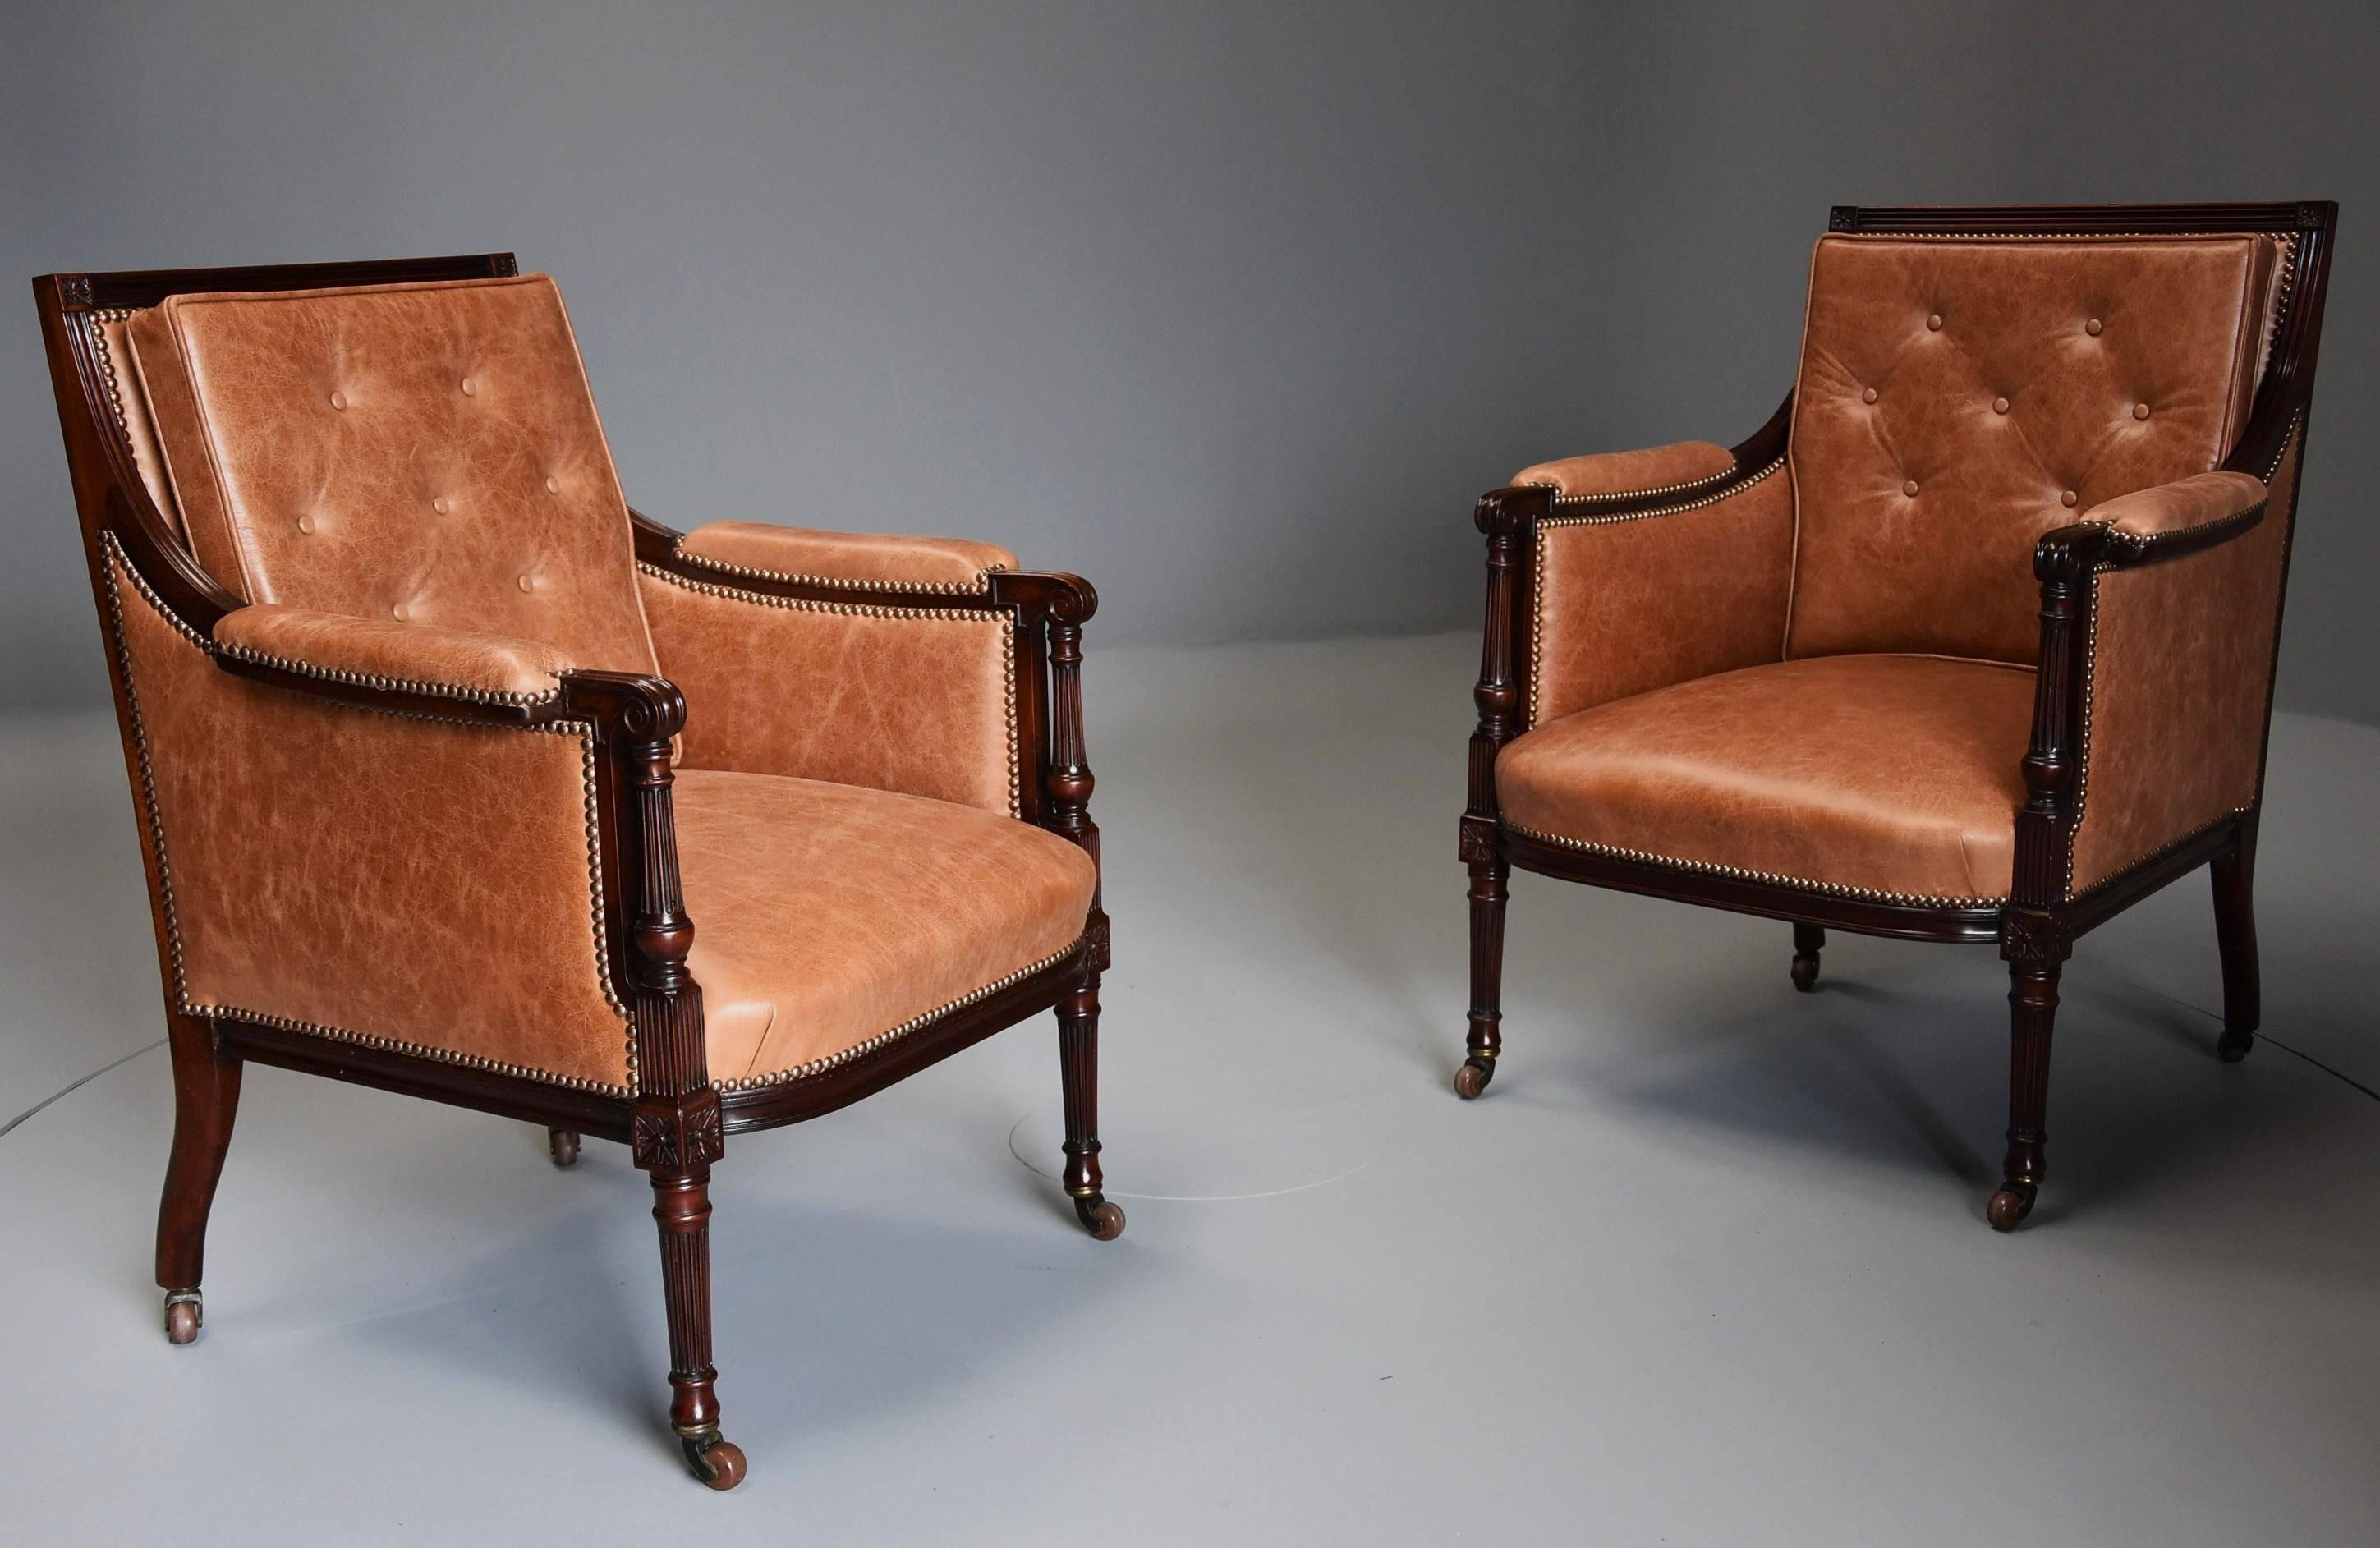 English Superb Pair of Late 19th Century ‘His & Hers’ Mahogany Bergere Library Chairs